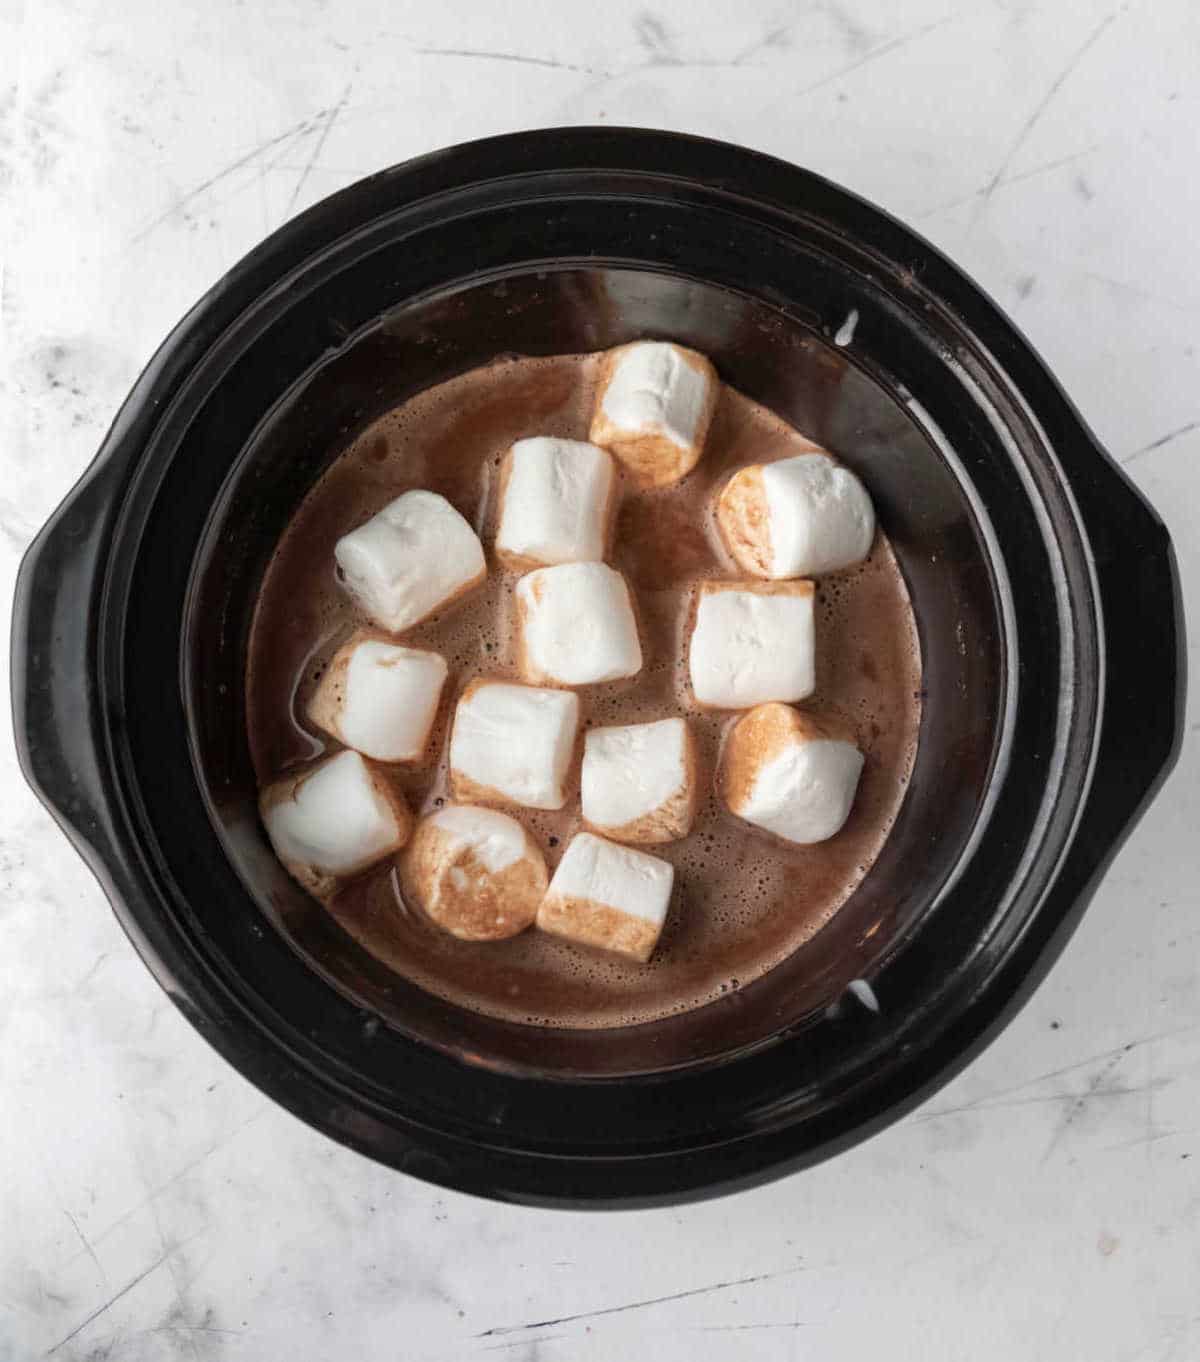 Slow cooker insert full of hot chocolate and marshmallows. 